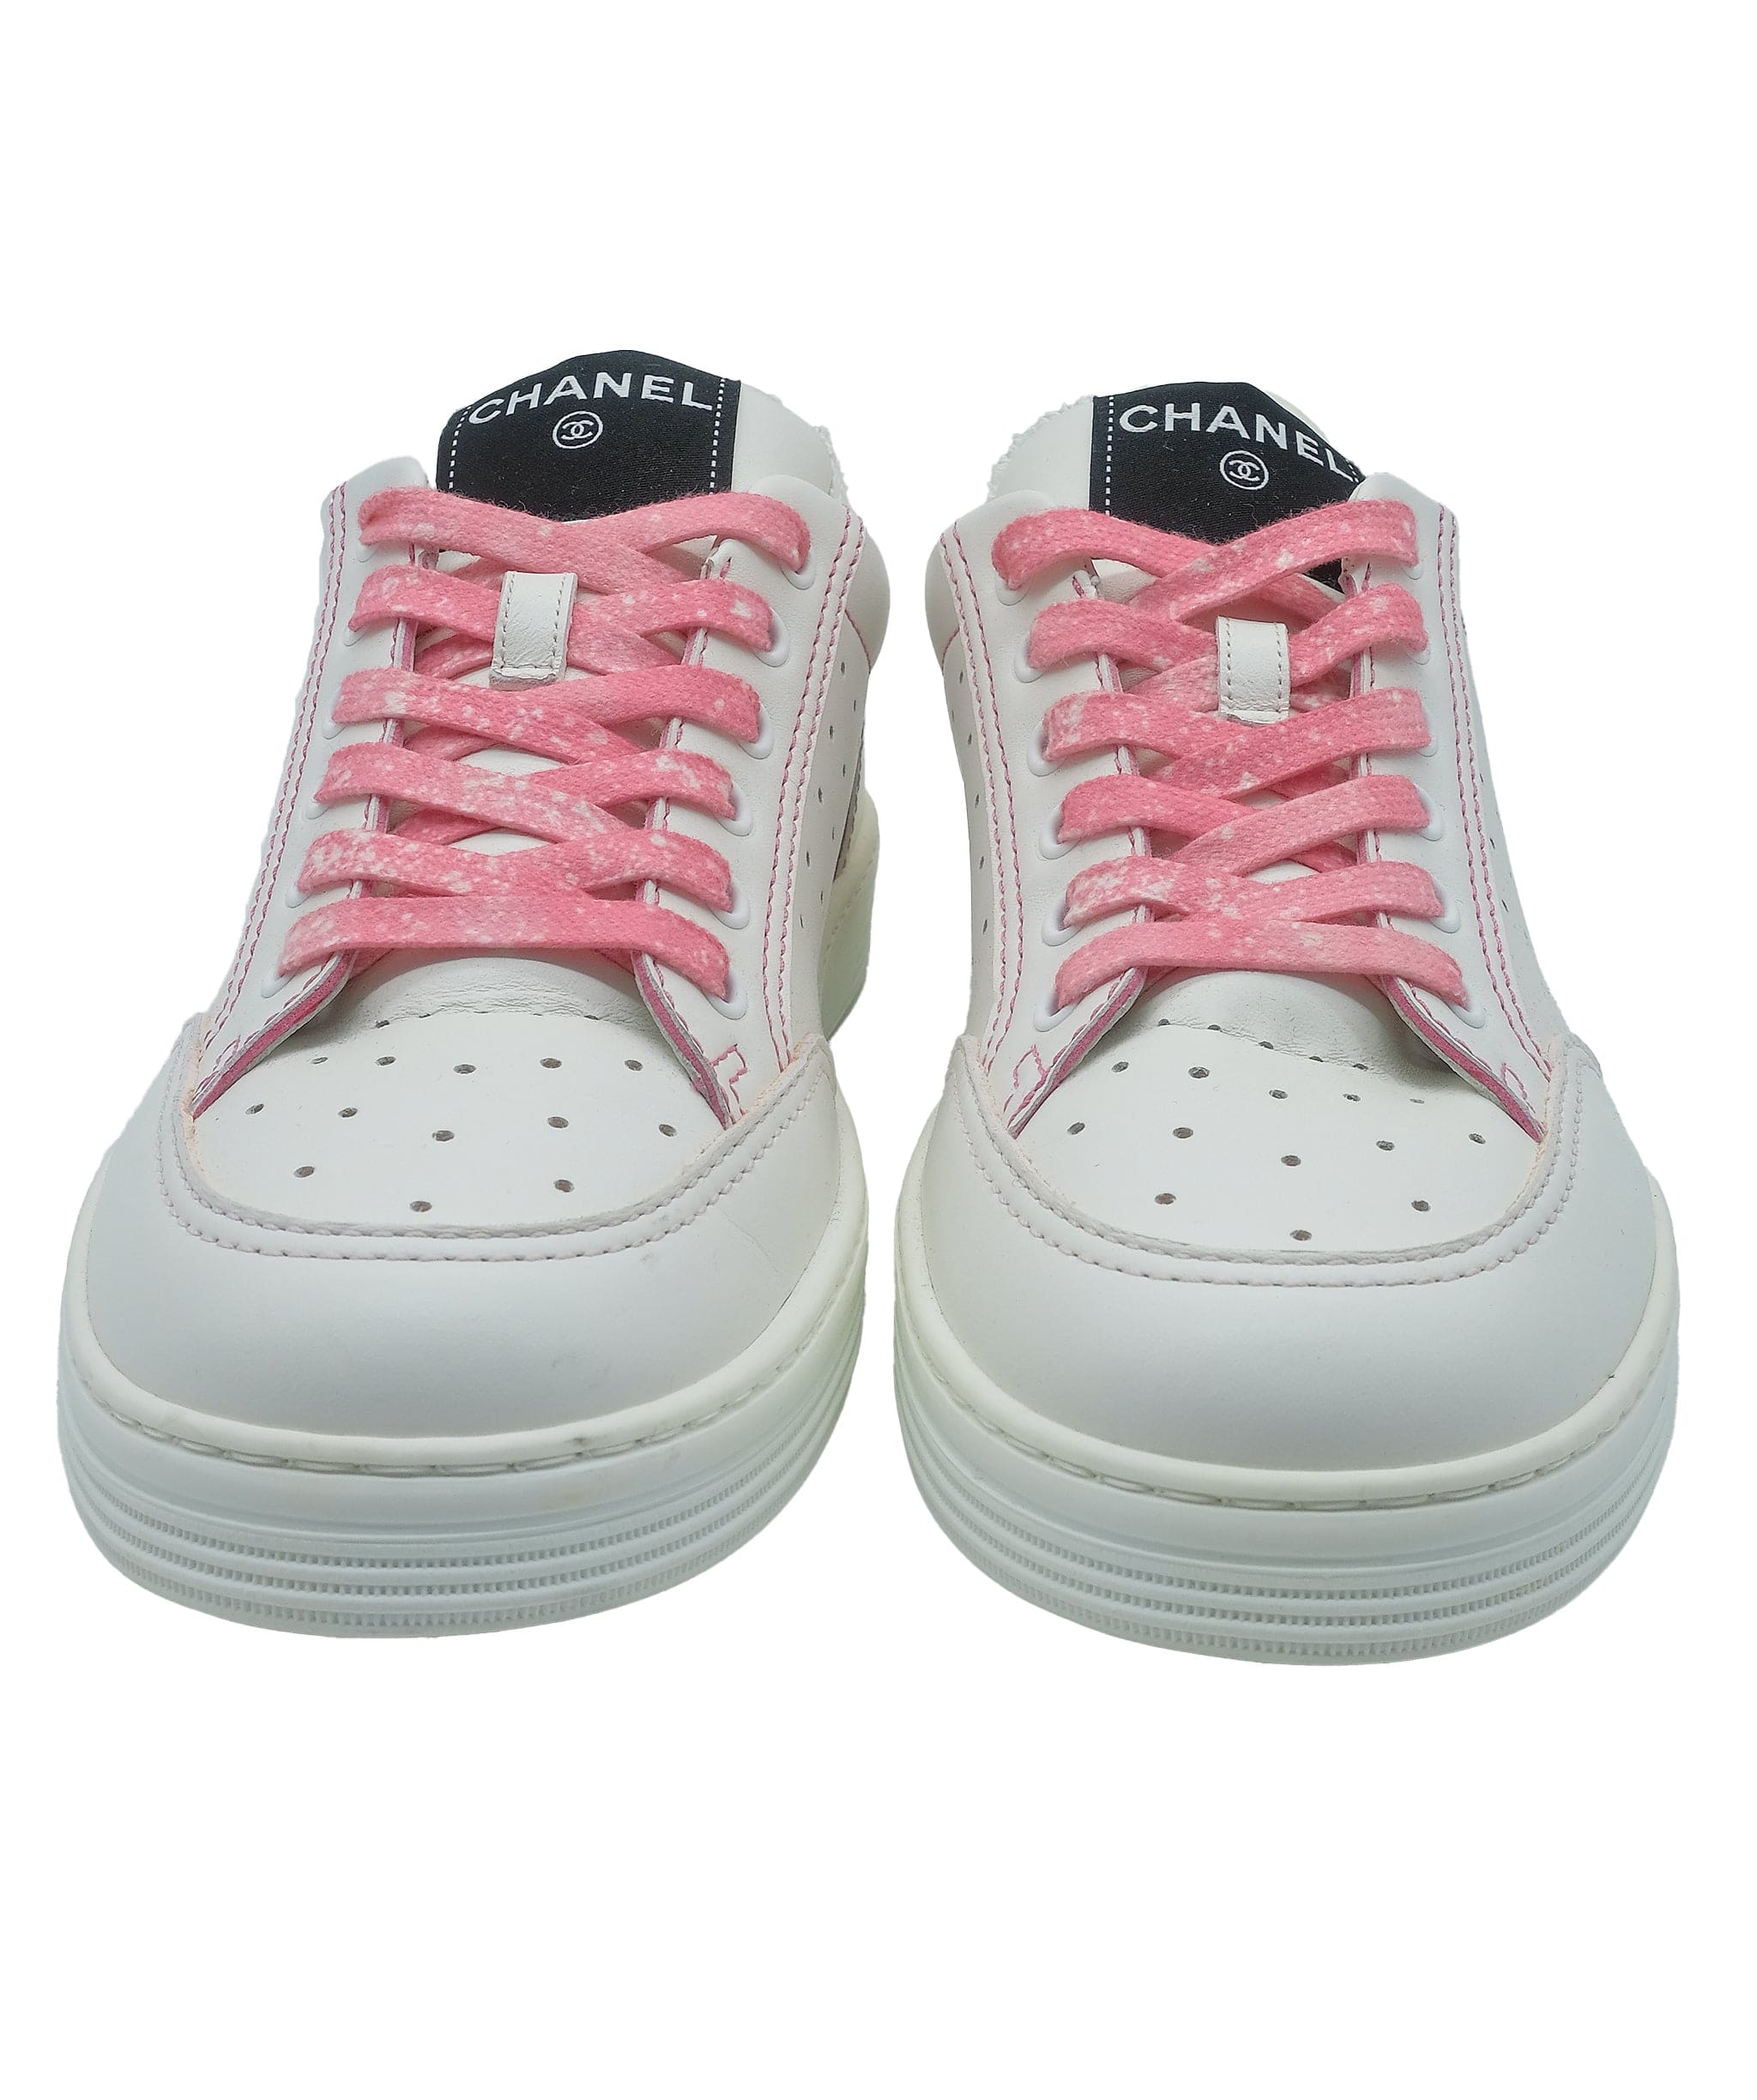 Chanel Chanel Pink Sneakers 40